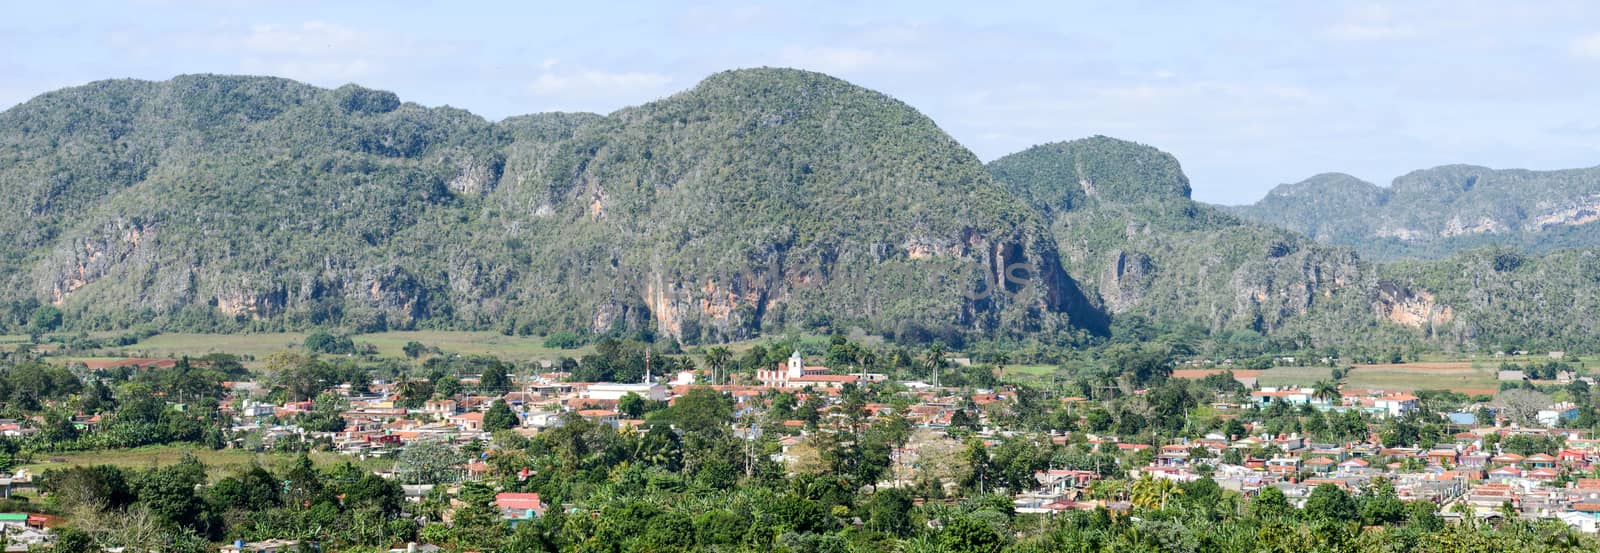 Town and valley of Vinales, Cuba by Fotoember